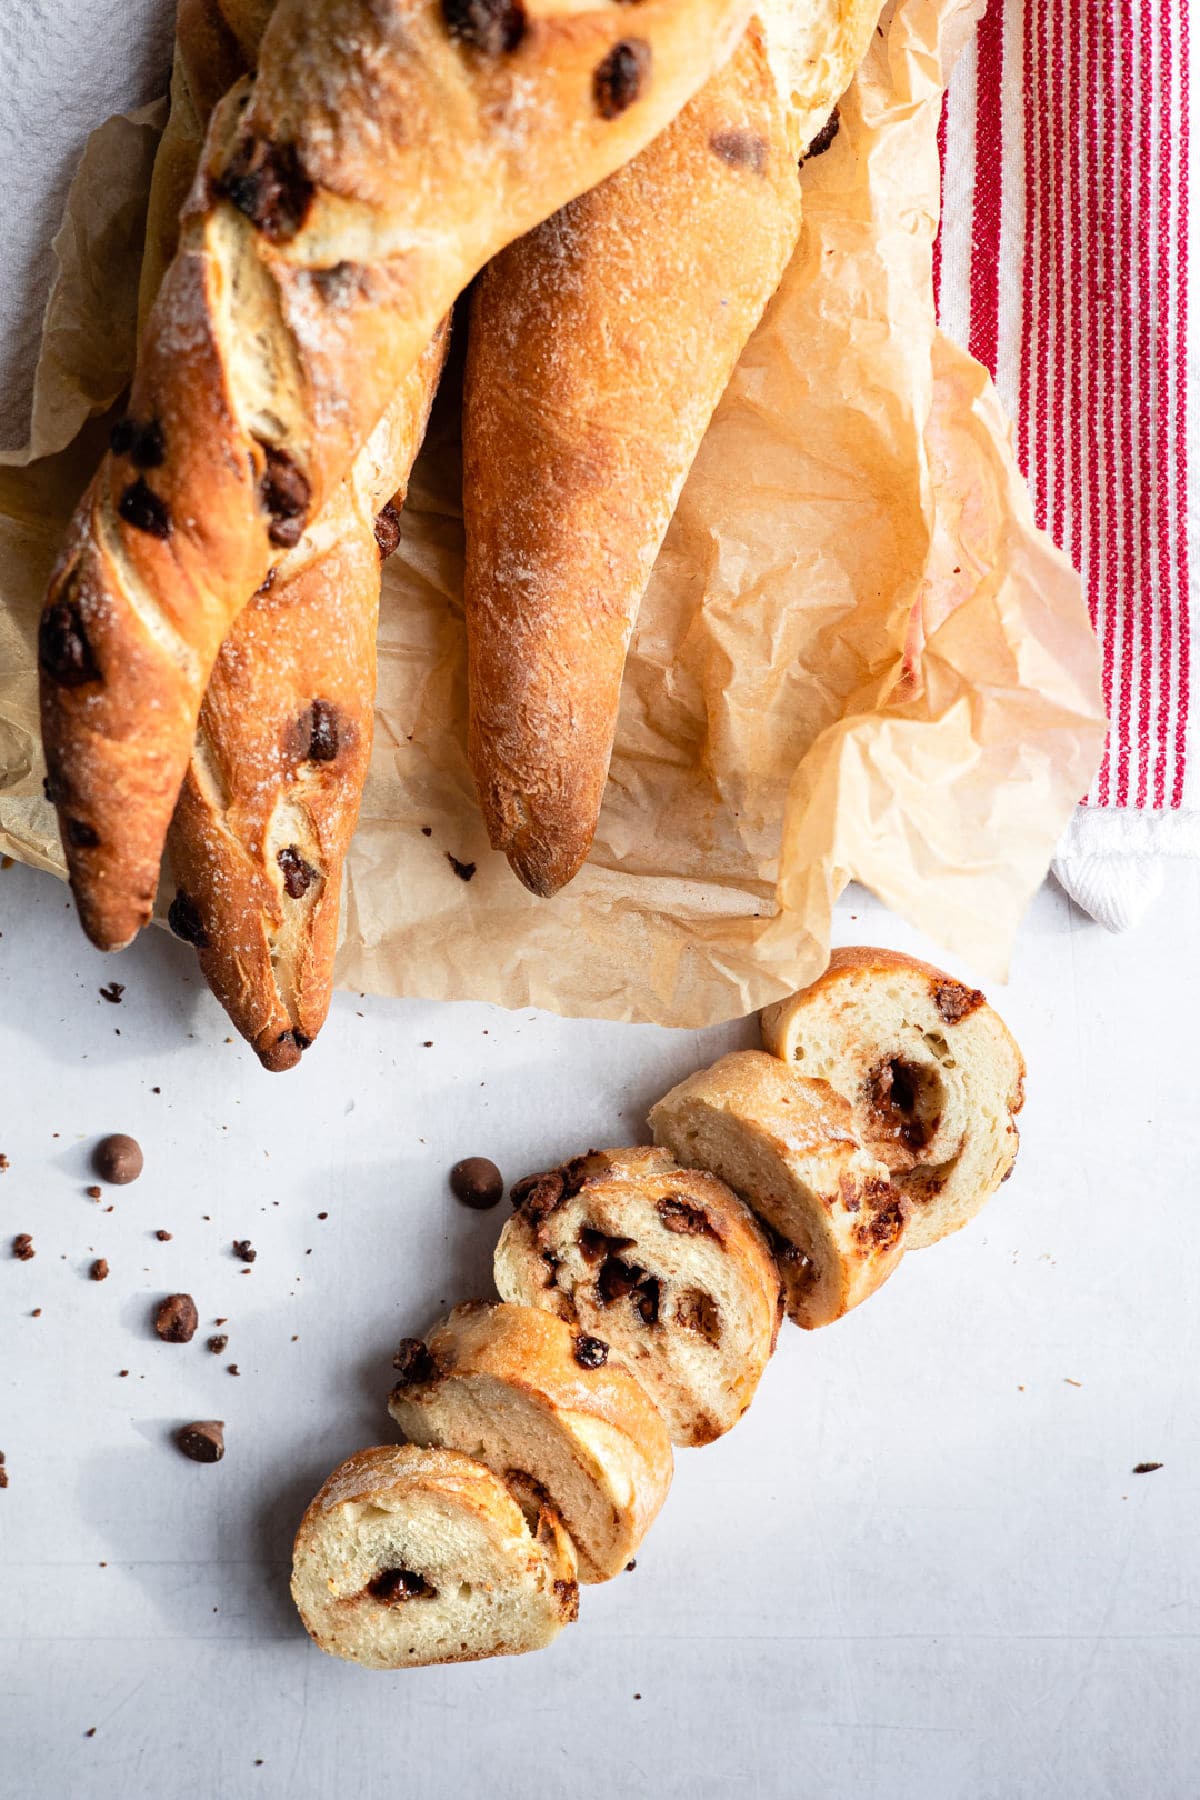 A cut chocolate chip baguette next to several baked baguettes.